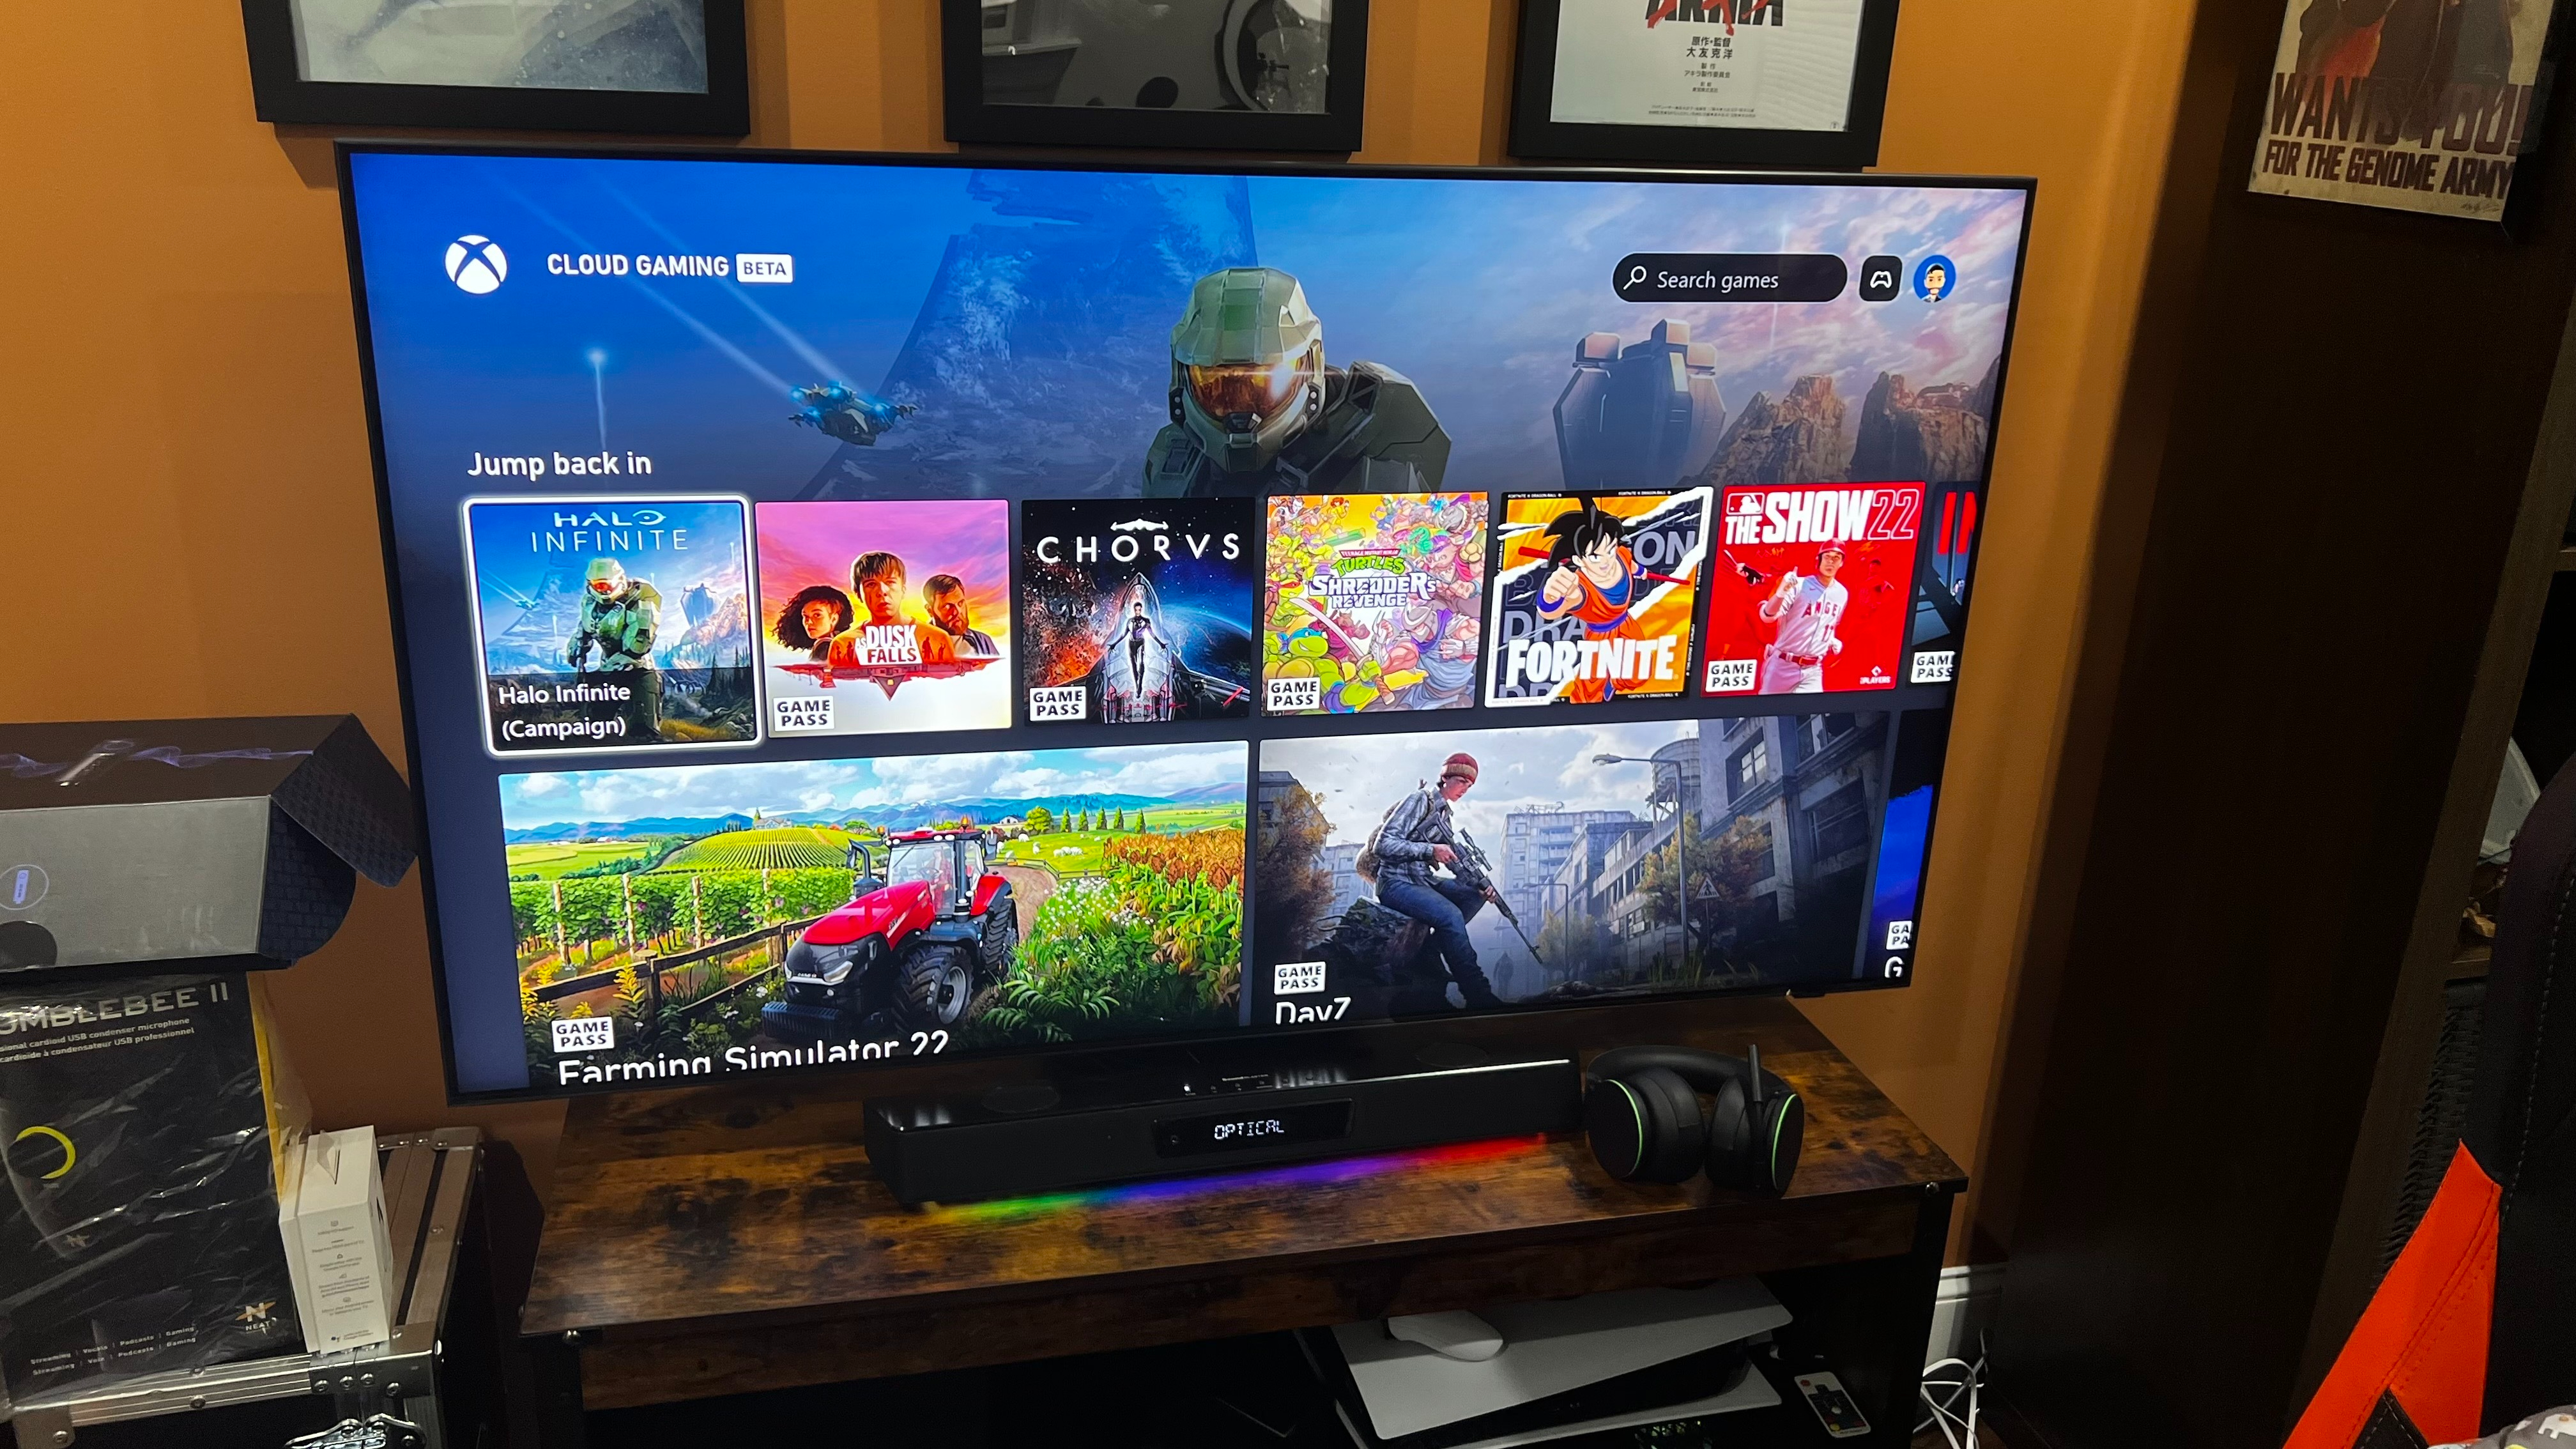 Streaming Xbox games to a Samsung TV is such a breeze that I wish every TV  could do it